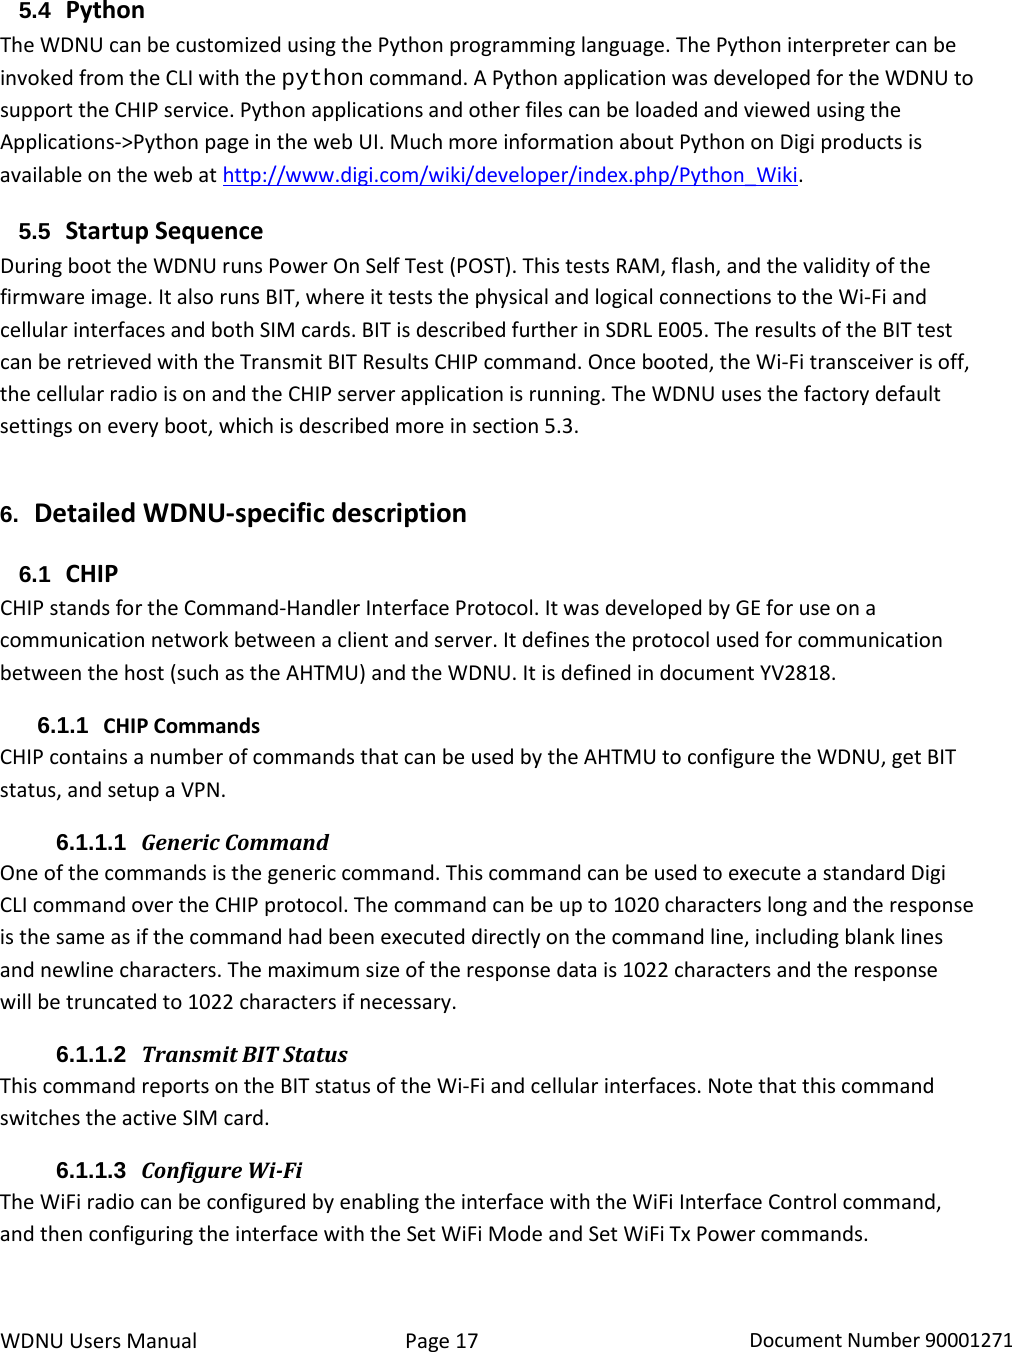 WDNU Users Manual Page 17 Document Number 90001271  5.4 Python The WDNU can be customized using the Python programming language. The Python interpreter can be invoked from the CLI with the python command. A Python application was developed for the WDNU to support the CHIP service. Python applications and other files can be loaded and viewed using the Applications-&gt;Python page in the web UI. Much more information about Python on Digi products is available on the web at http://www.digi.com/wiki/developer/index.php/Python_Wiki.  5.5 Startup Sequence During boot the WDNU runs Power On Self Test (POST). This tests RAM, flash, and the validity of the firmware image. It also runs BIT, where it tests the physical and logical connections to the Wi-Fi and cellular interfaces and both SIM cards. BIT is described further in SDRL E005. The results of the BIT test can be retrieved with the Transmit BIT Results CHIP command. Once booted, the Wi-Fi transceiver is off,  the cellular radio is on and the CHIP server application is running. The WDNU uses the factory default settings on every boot, which is described more in section 5.3. 6. Detailed WDNU-specific description 6.1 CHIP CHIP stands for the Command-Handler Interface Protocol. It was developed by GE for use on a communication network between a client and server. It defines the protocol used for communication between the host (such as the AHTMU) and the WDNU. It is defined in document YV2818. 6.1.1 CHIP Commands CHIP contains a number of commands that can be used by the AHTMU to configure the WDNU, get BIT status, and setup a VPN.  6.1.1.1 Generic Command One of the commands is the generic command. This command can be used to execute a standard Digi CLI command over the CHIP protocol. The command can be up to 1020 characters long and the response is the same as if the command had been executed directly on the command line, including blank lines and newline characters. The maximum size of the response data is 1022 characters and the response will be truncated to 1022 characters if necessary. 6.1.1.2 Transmit BIT Status This command reports on the BIT status of the Wi-Fi and cellular interfaces. Note that this command switches the active SIM card. 6.1.1.3 Configure Wi-Fi The WiFi radio can be configured by enabling the interface with the WiFi Interface Control command, and then configuring the interface with the Set WiFi Mode and Set WiFi Tx Power commands.  